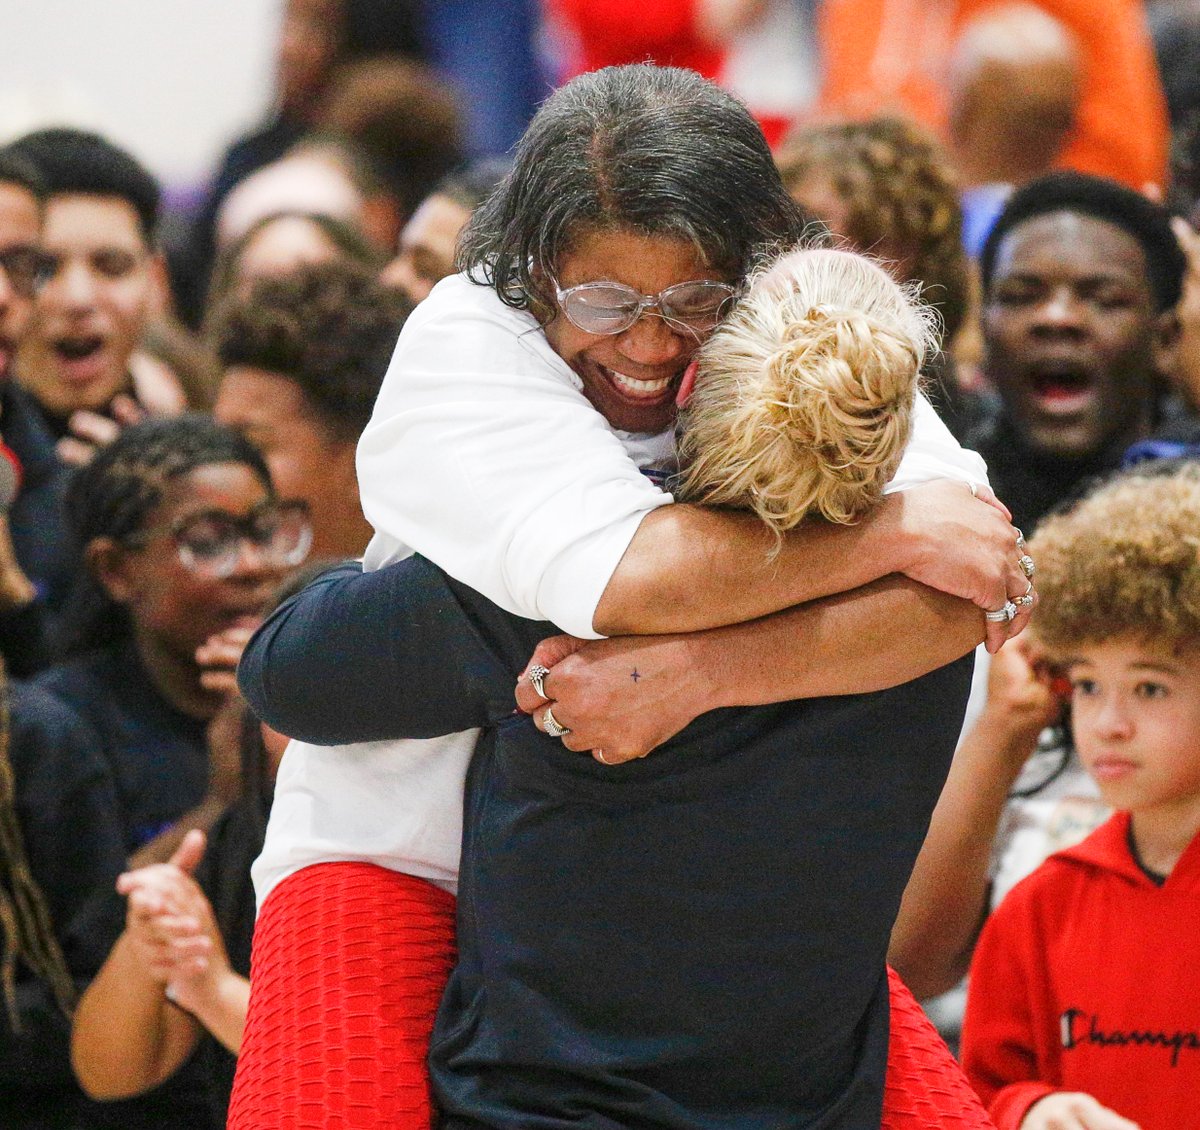 It's truly special how @PHS_WeAreOne coach Amy Hughes has helped transformed the Trojans' program. In her first 4 seasons, Portsmouth was 27-50. The last 2? 41-10. Now, they're headed to their first-ever Final 4 with a community fully behind them. 💪 📸: @dw1509